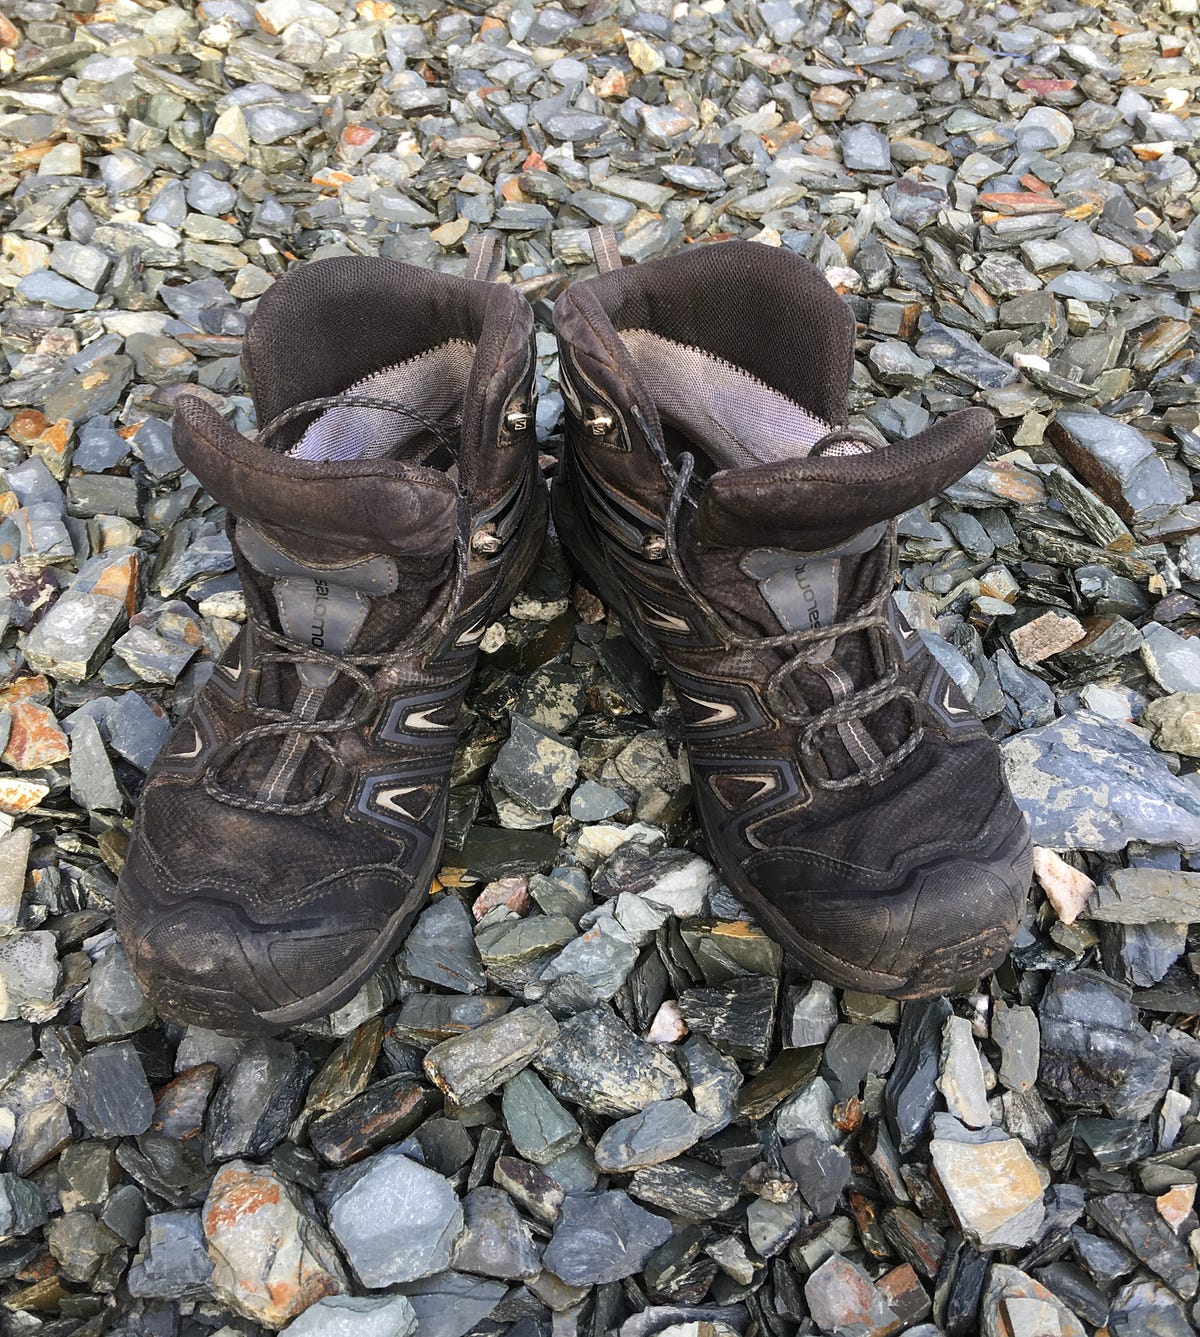 Salomon X ULTRA 3 Mid GTX WIDE Review | by Peter Gold | Trail Tales | Medium